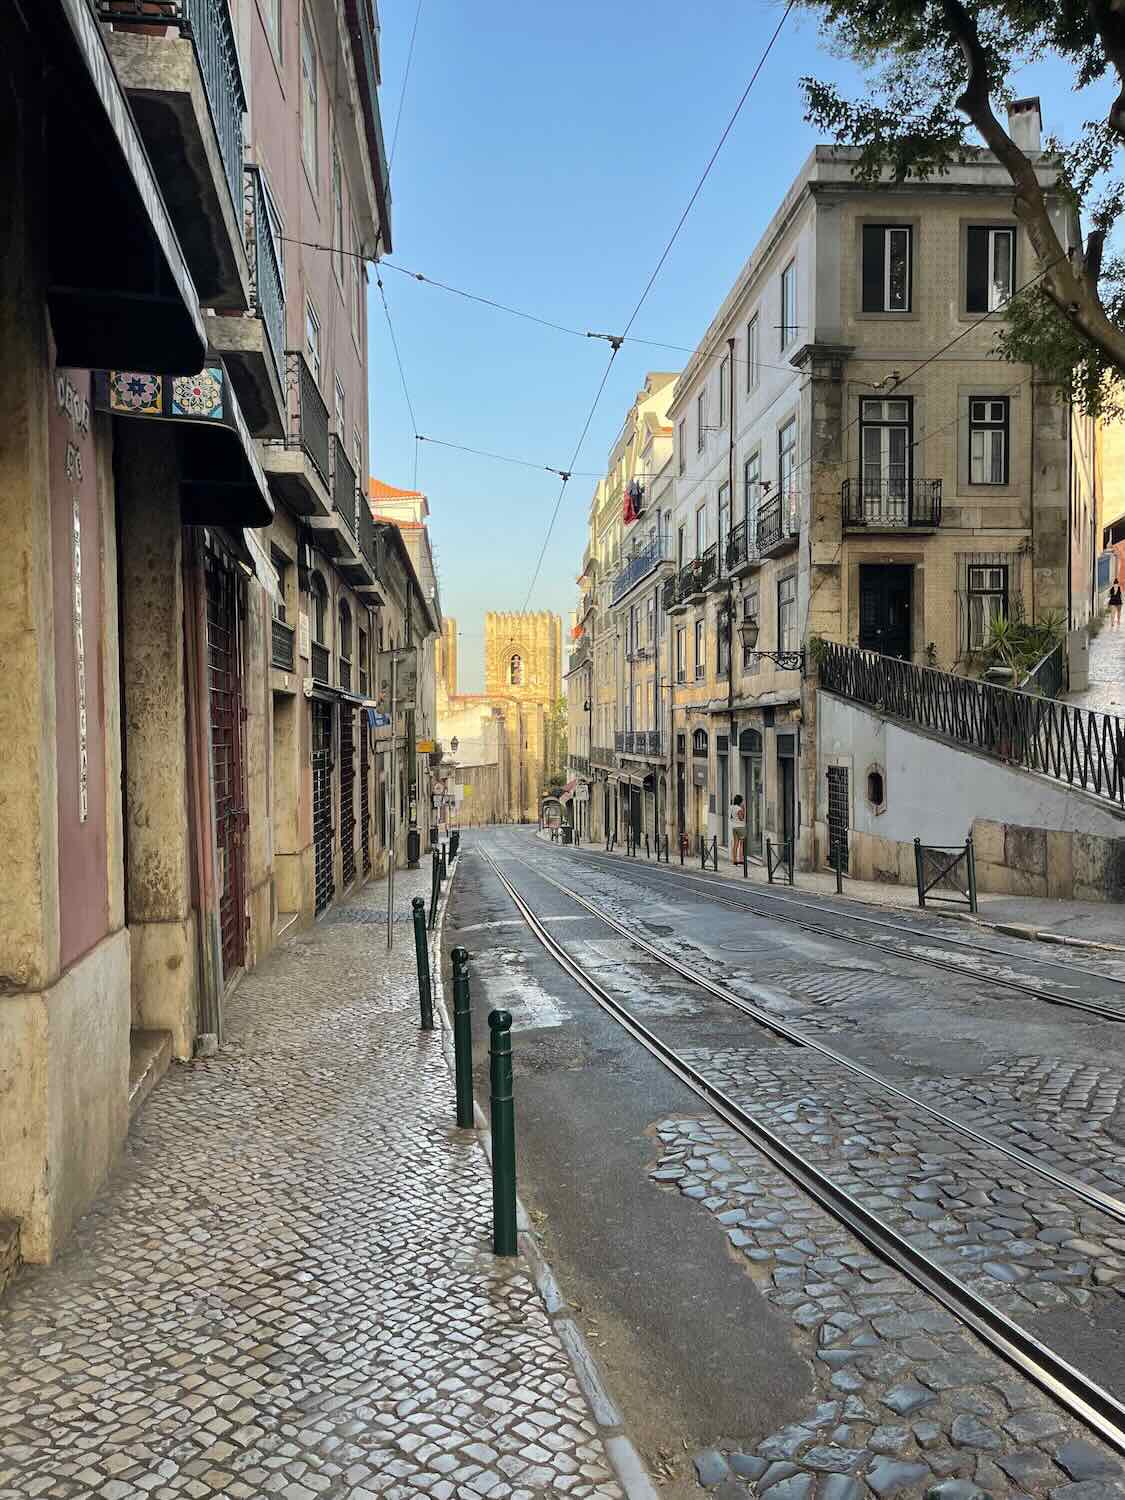 Deserted cobblestone streets in the early morning light with Lisbon's traditional architecture and tram lines leading towards the Se Cathedral in the distance.